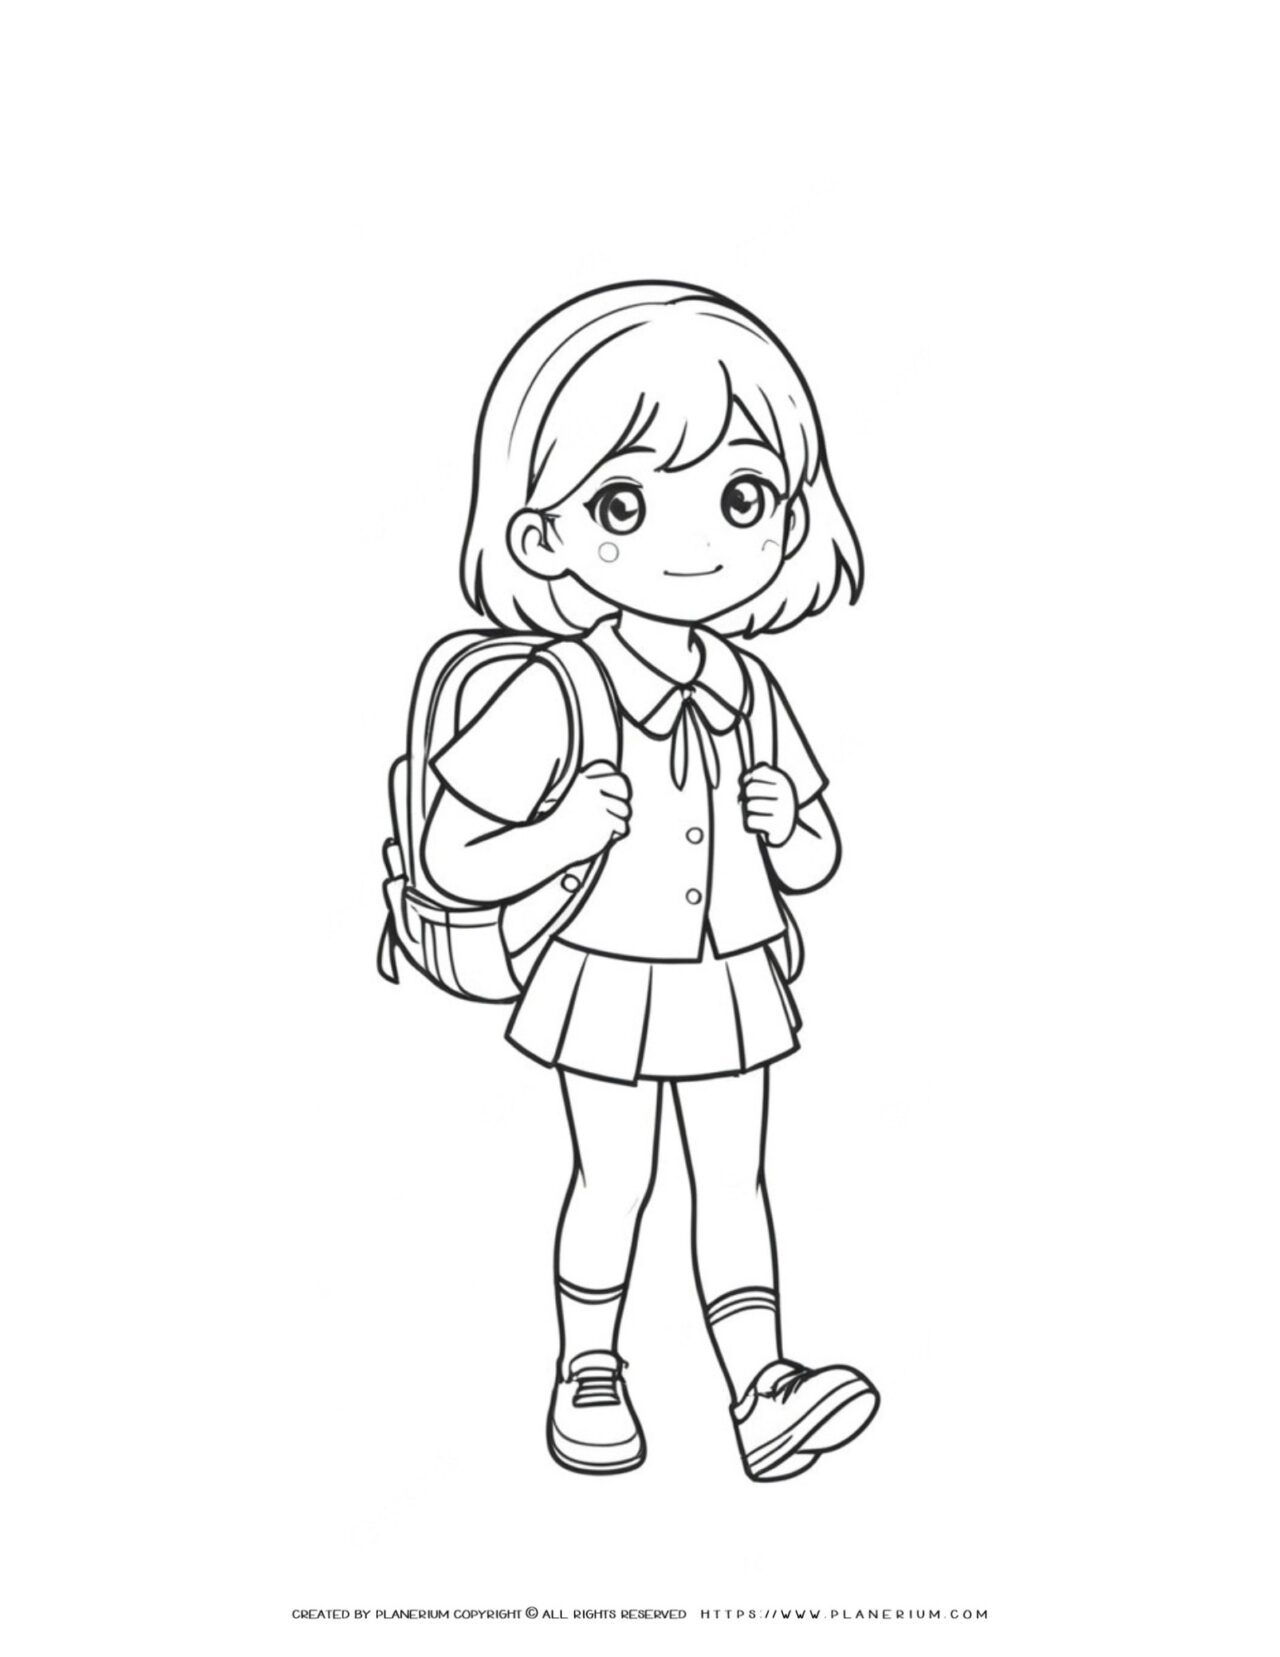 girl-going-to-school-with-a-backpack-anime-style-coloring-page-for-kids